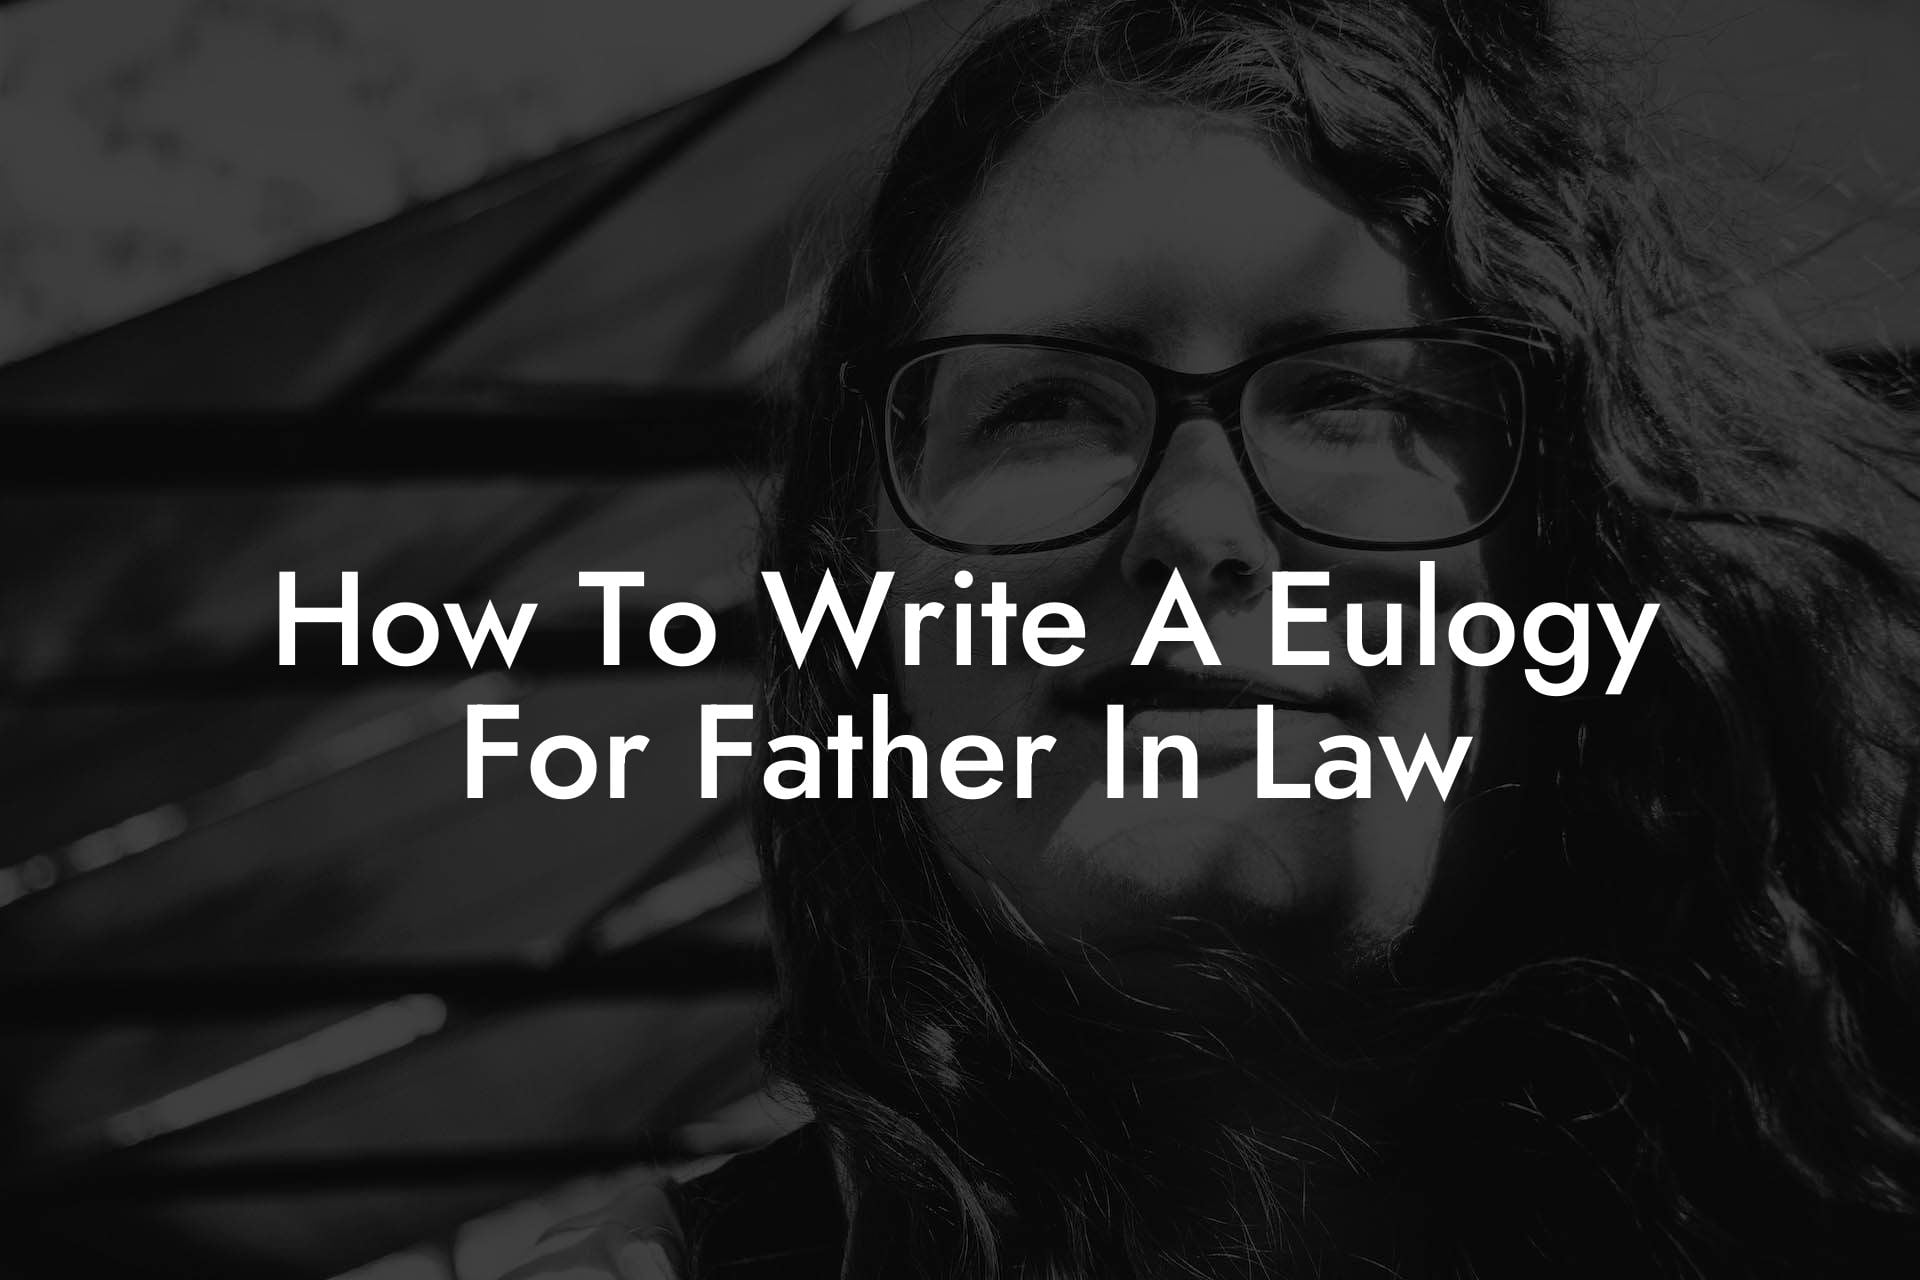 How To Write A Eulogy For Father In Law